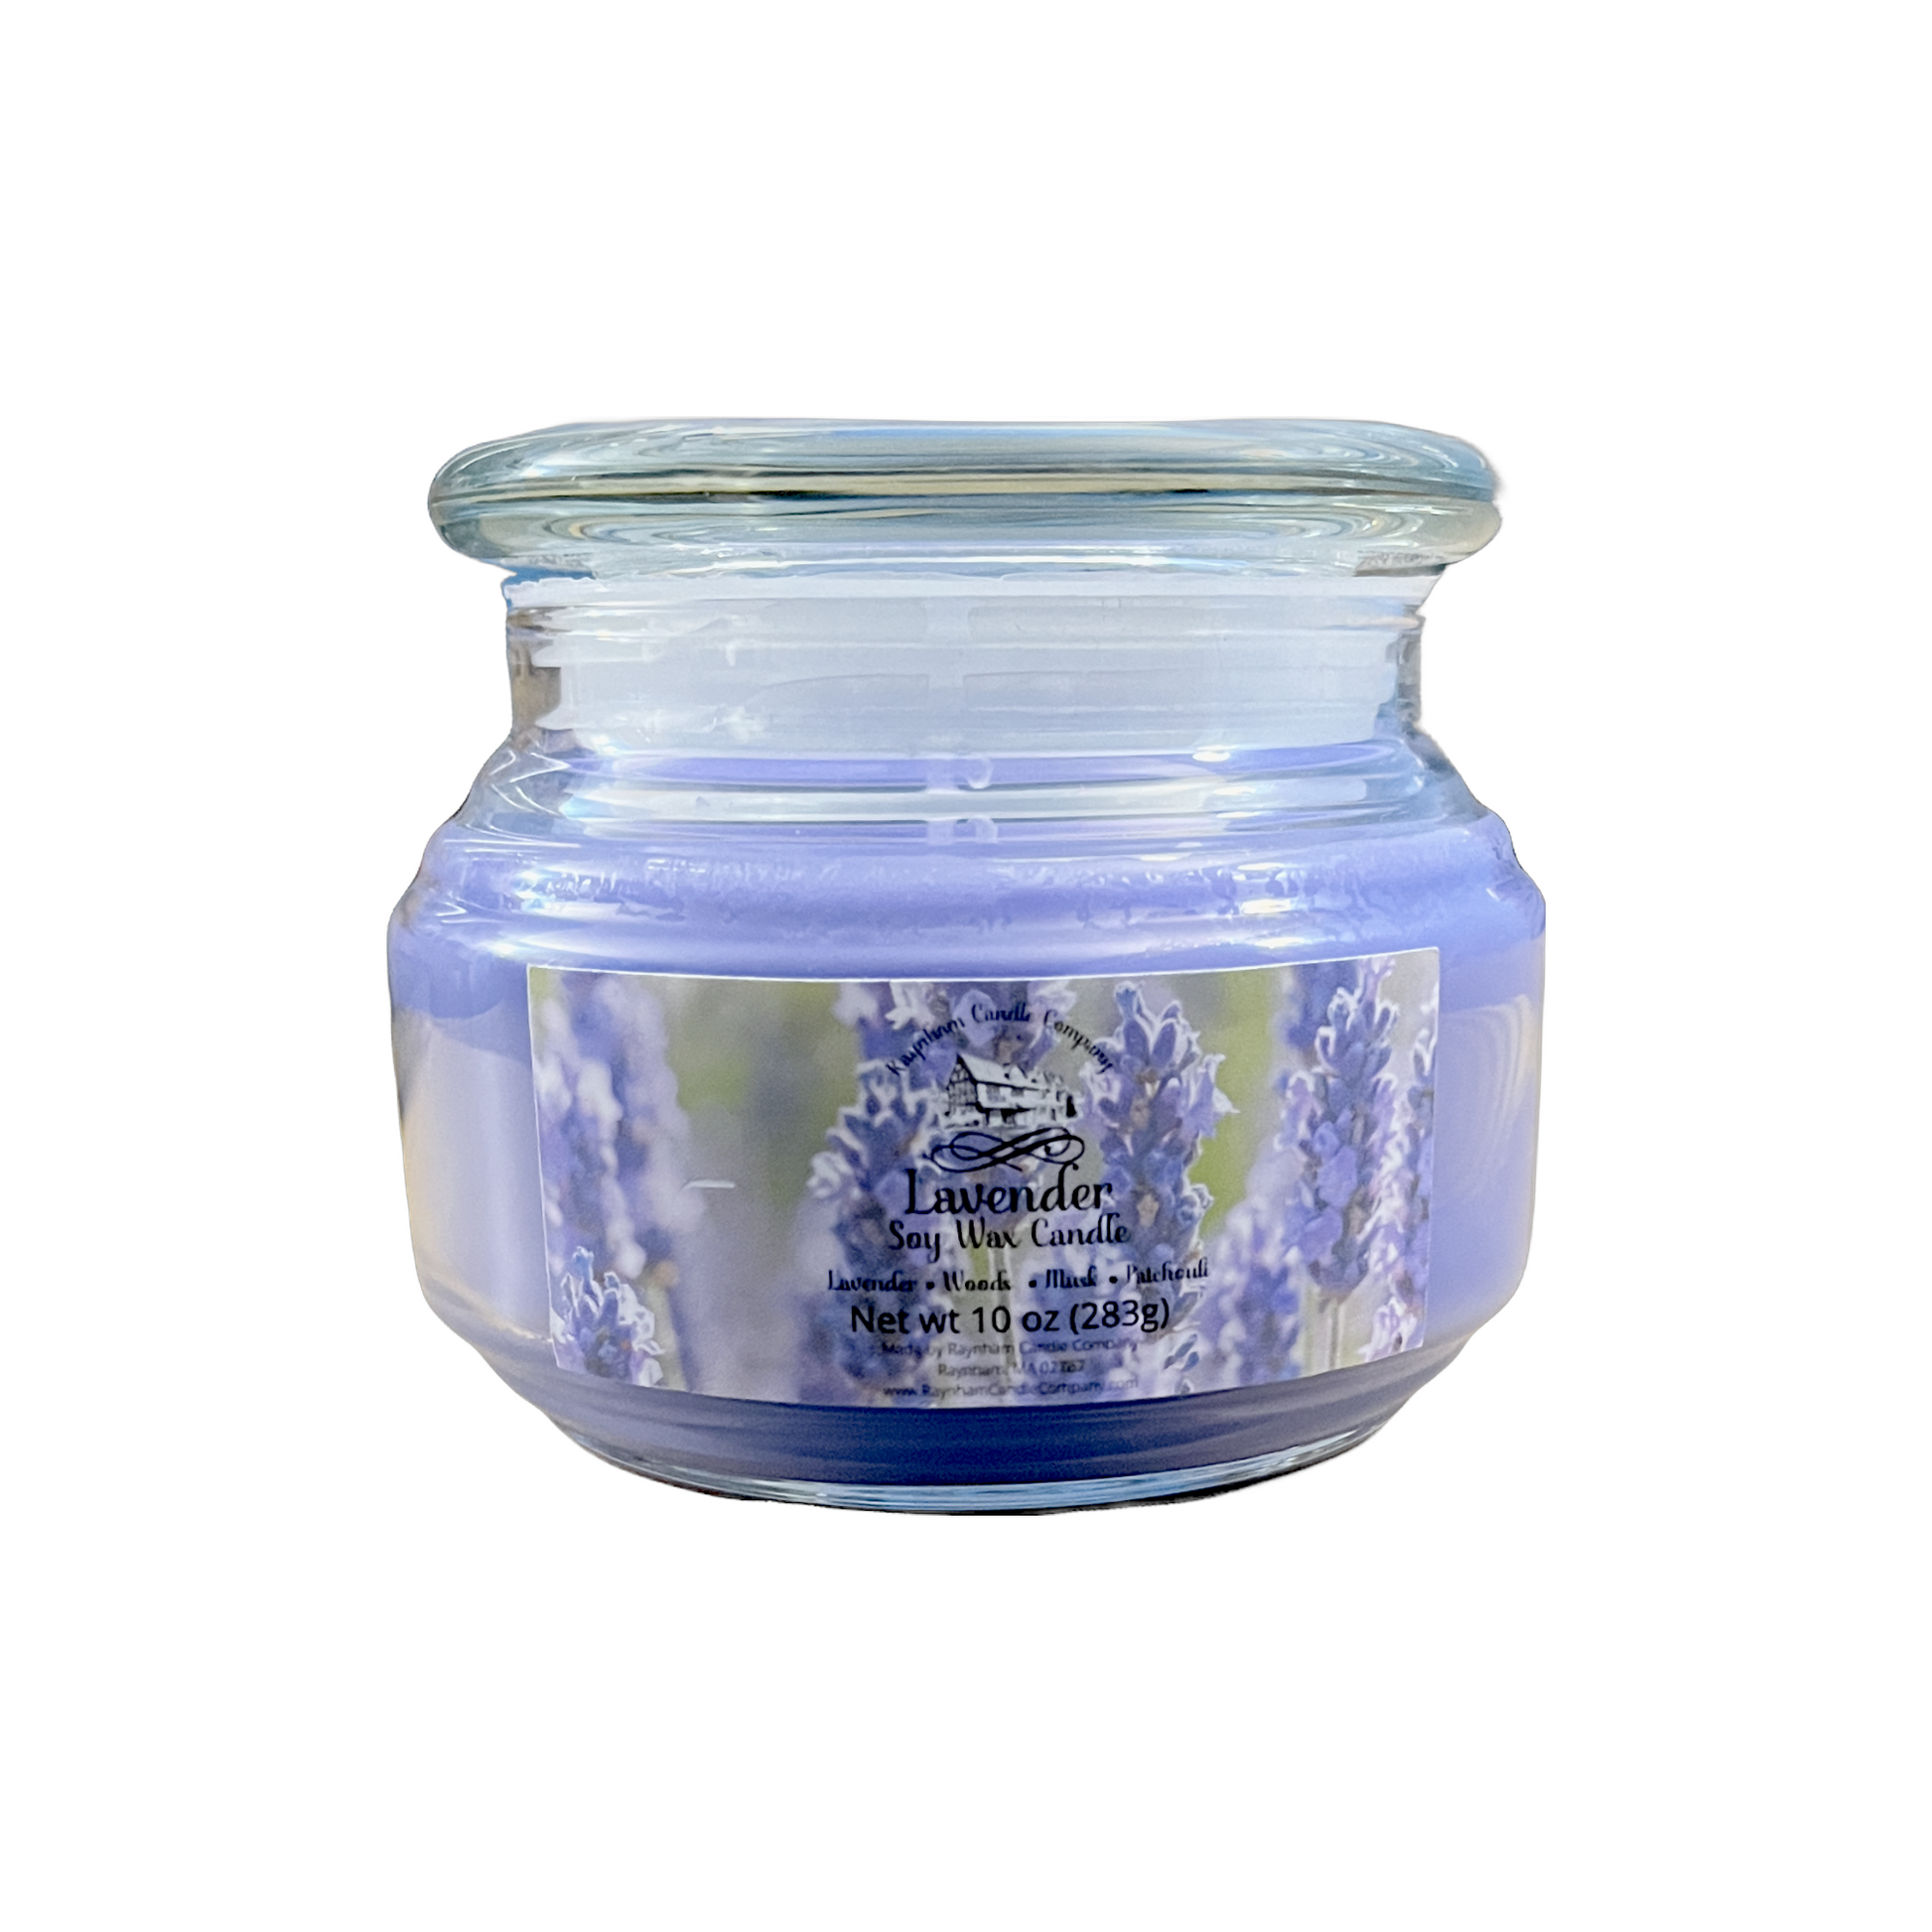 Lavender - Premium  from Raynham Candle Company  - Just $5! Shop now at Raynham Candle Company 